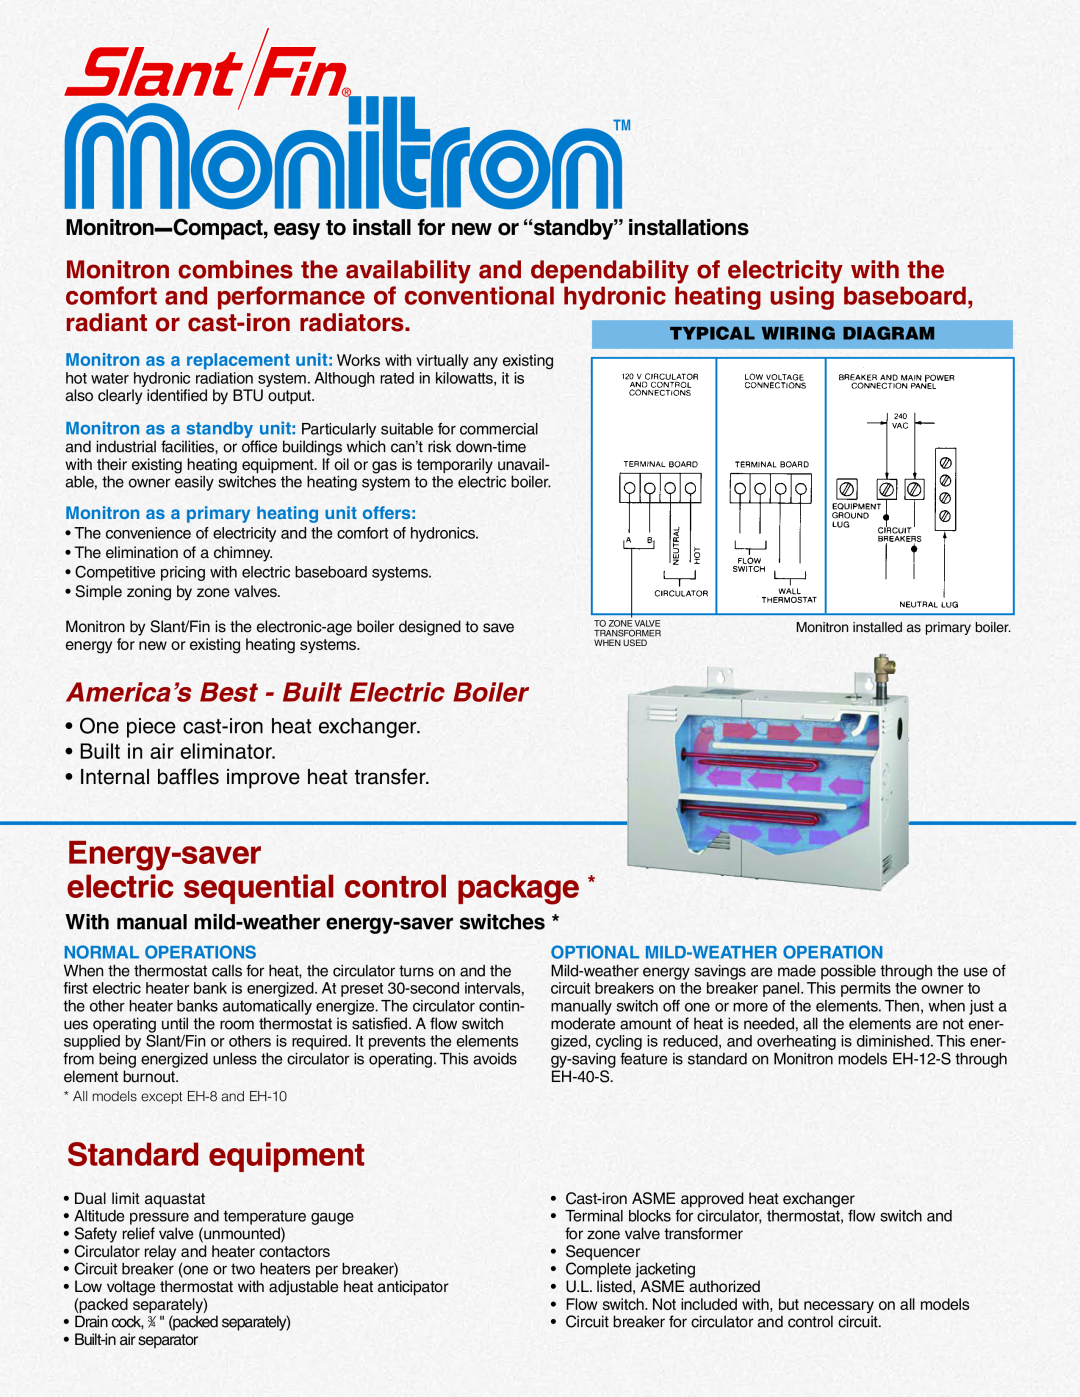 Slant/Fin Monitron EH Boilers Energy-saver electric sequential control package, Standard equipment, Normal Operations 